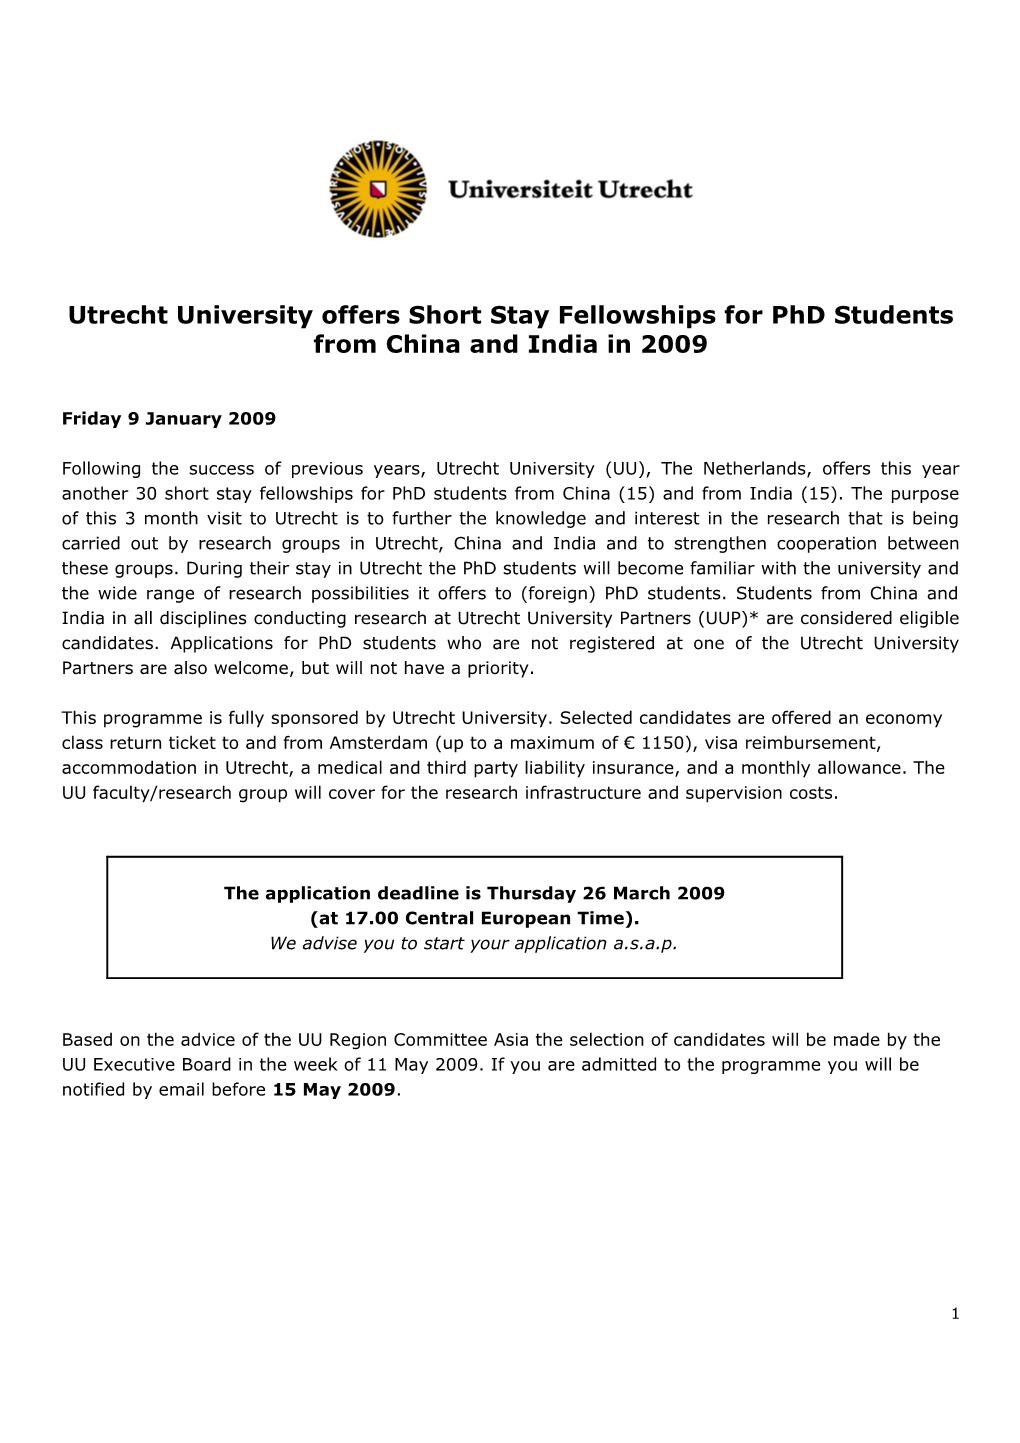 Utrechtuniversity Offers Short Stay Fellowships for Phd Students from China and India in 2009